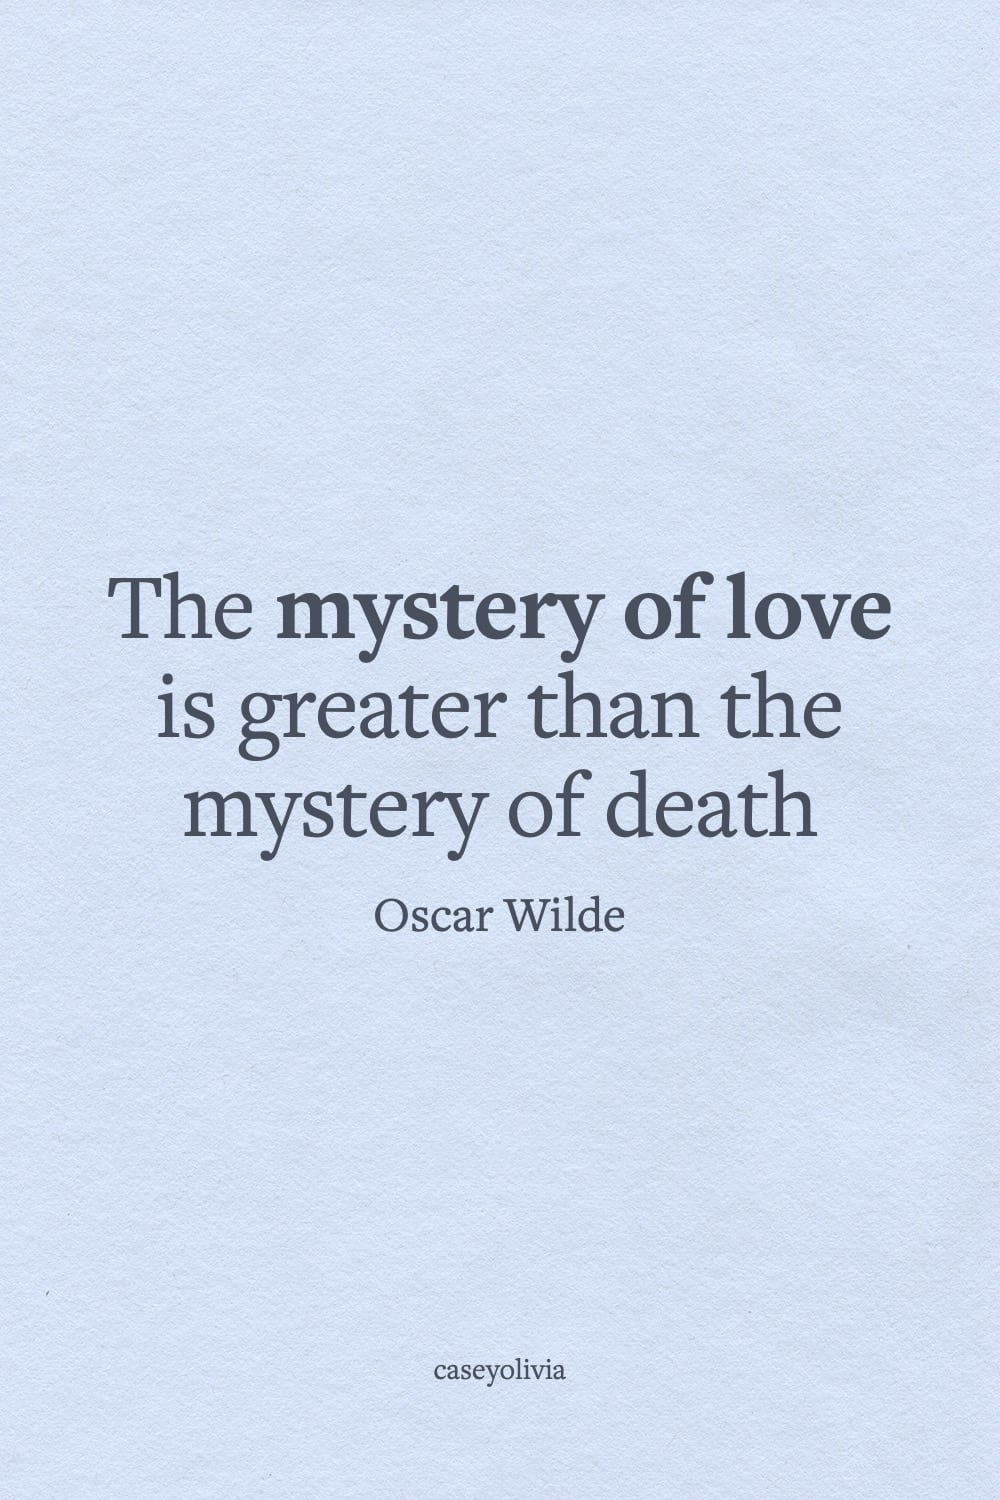 oscar wilde mystery of love quote about life